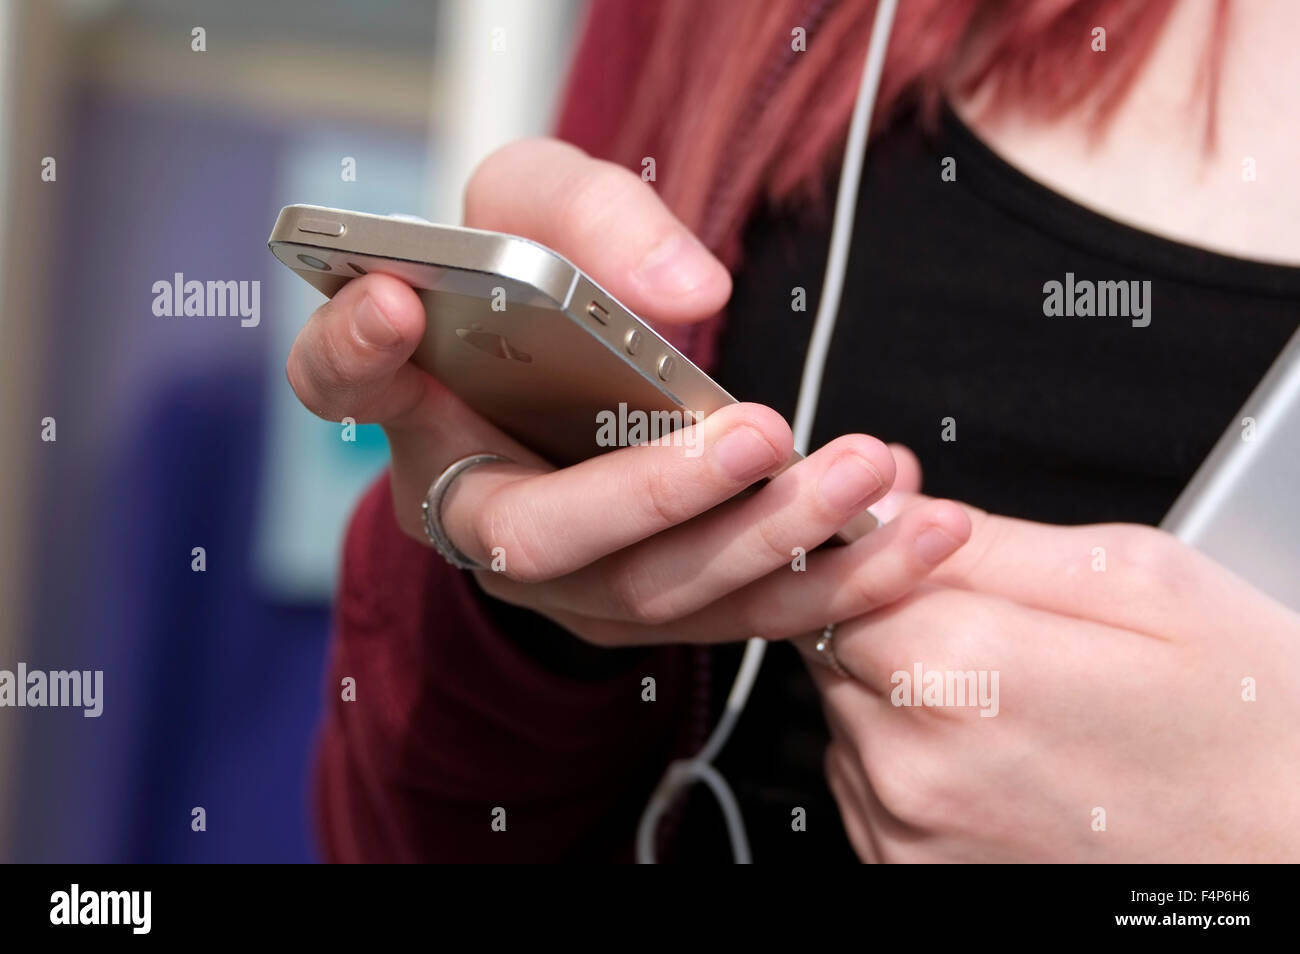 young female teenager using mobile phone Stock Photo